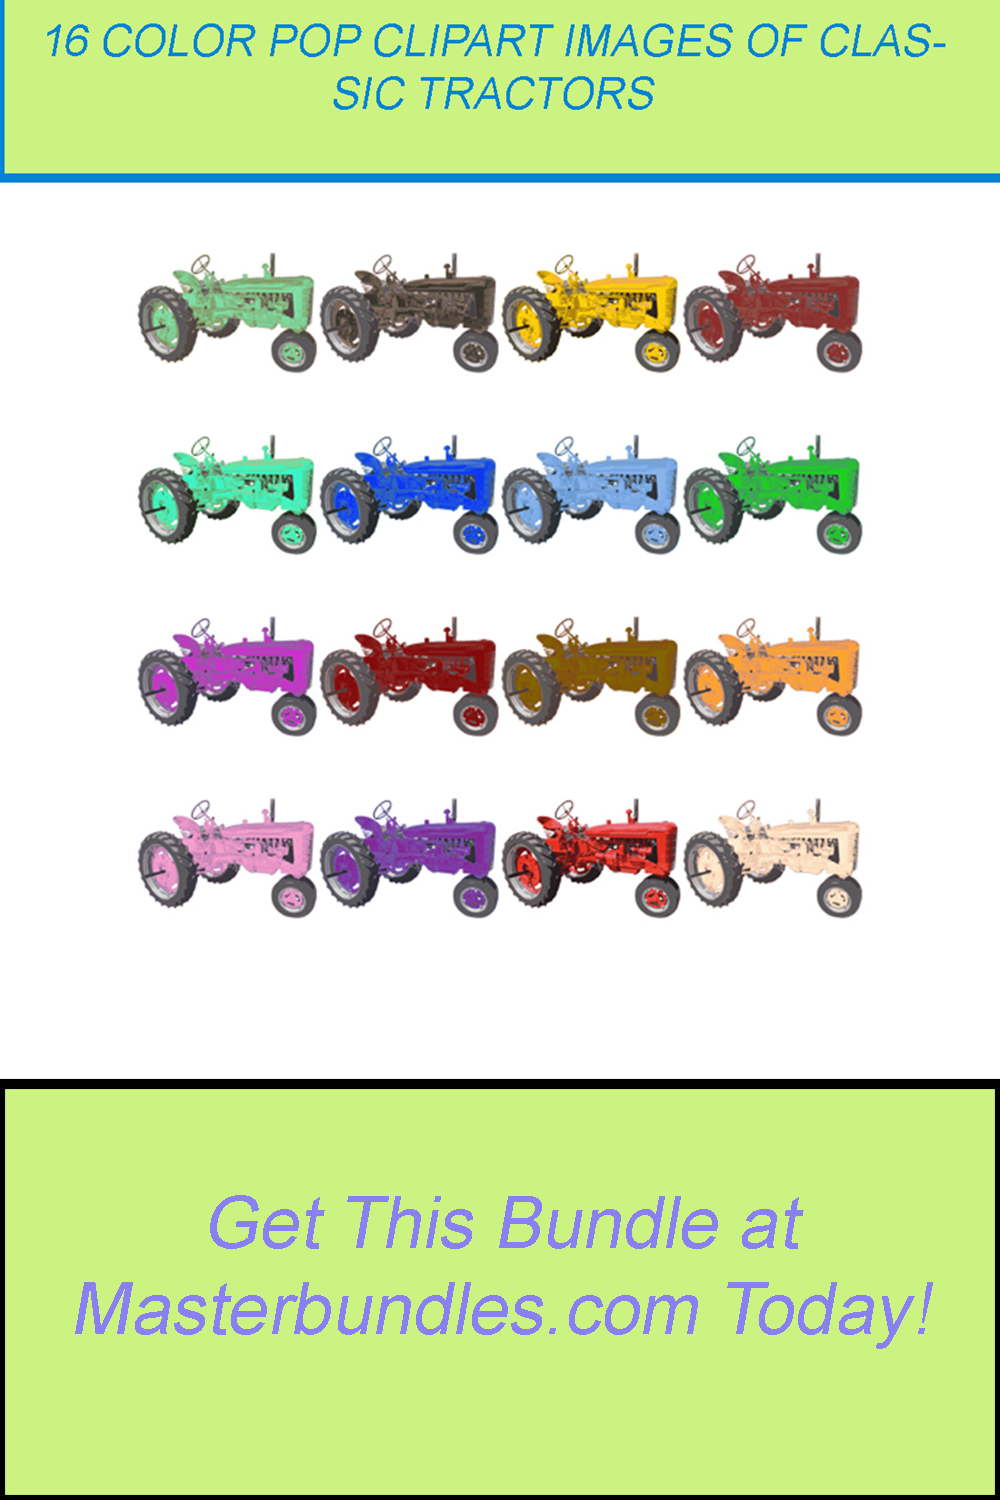 16 COLOR POP CLIPART IMAGES OF CLASSIC TRACTOR pinterest preview image.